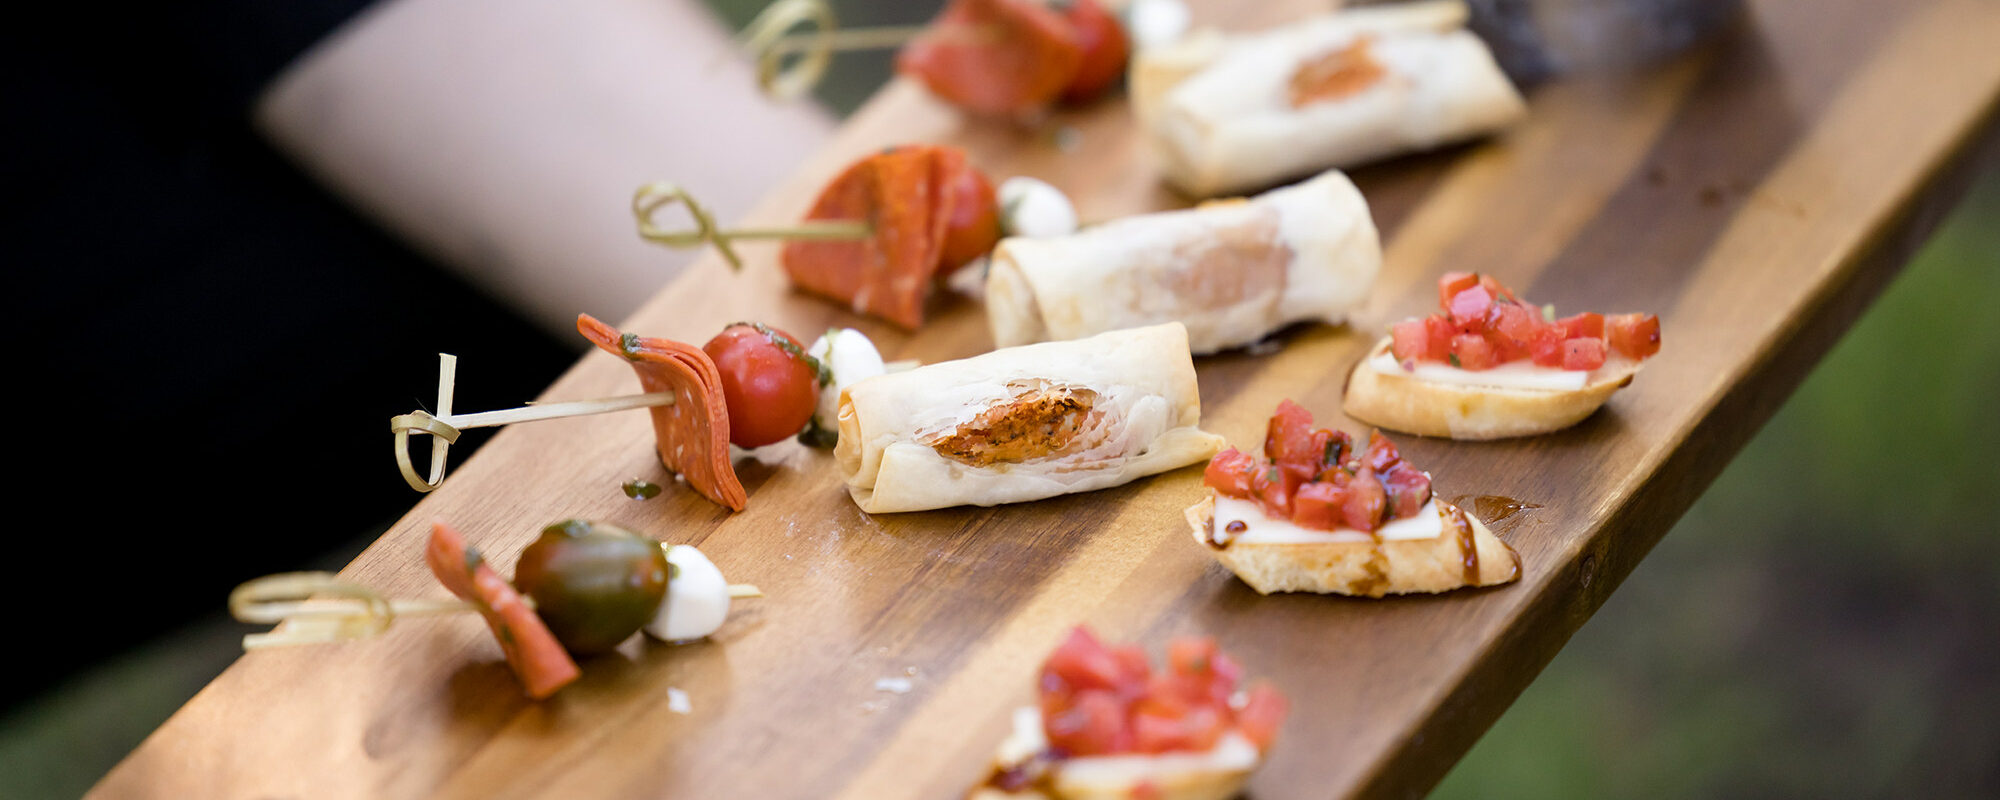 Top Three Most Popular Appetizers by Ensemble Catering featured image